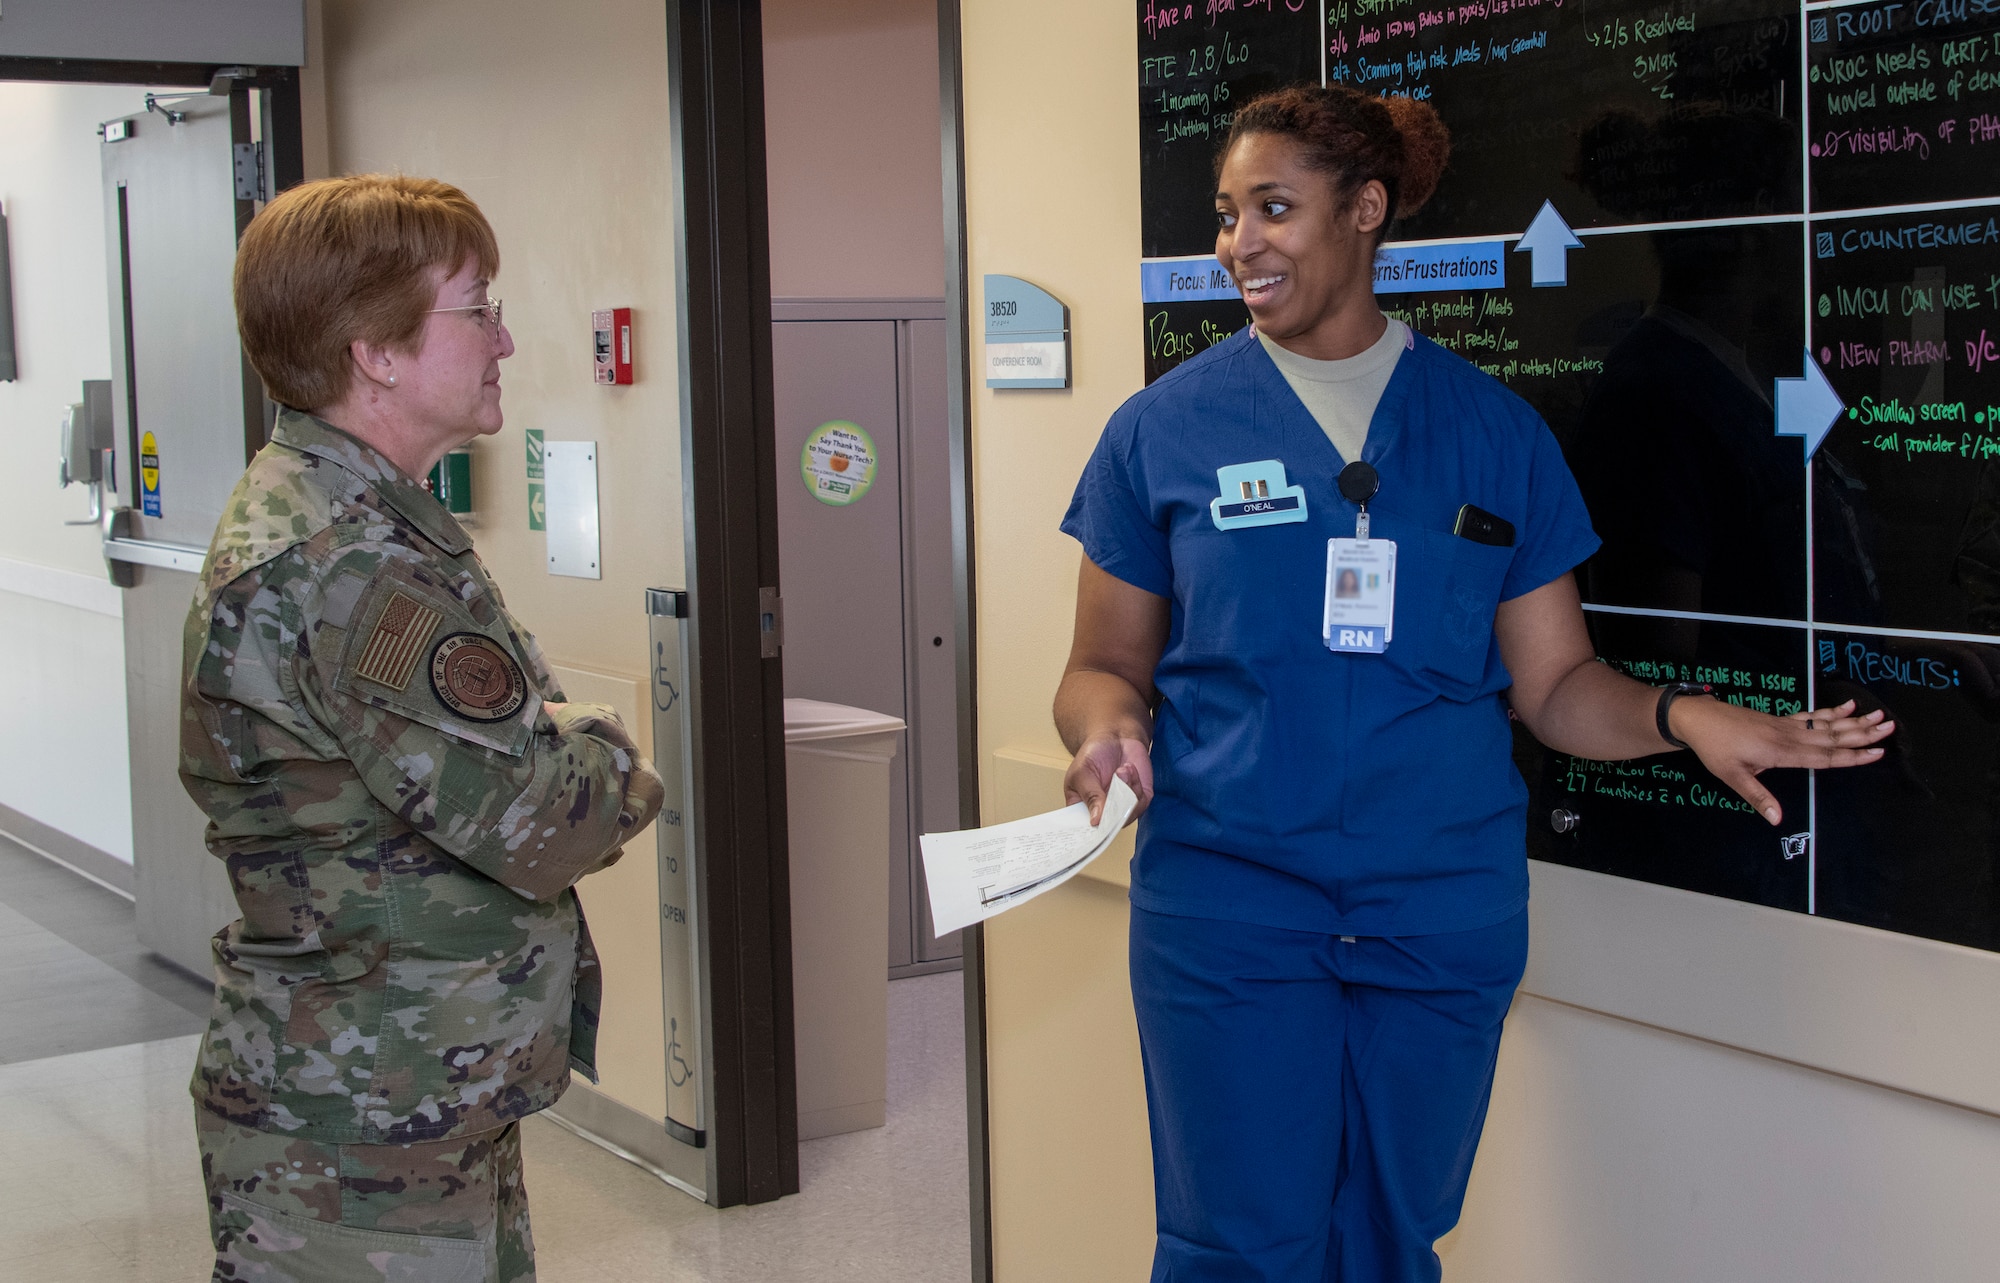 U.S. Air Force Capt. Karessa O’Neal, right, 60th Inpatient Squadron clinical nurse fellow, explains how patients and procedures are tracked on a situation board while Lt. Gen. Dorothy Hogg, Air Force Surgeon General, left, looks on during a tour of the 60th IPTC clinic, David Grant USAF Medical Center at Travis Air Force Base, California, Feb. 10, 2020. Hogg visited with 60th Medical Group Airmen and recognized the positive impact they have on their community through their innovative medical practices. (Photo altered for security reasons) (U.S. Air Force photo by Heide Couch